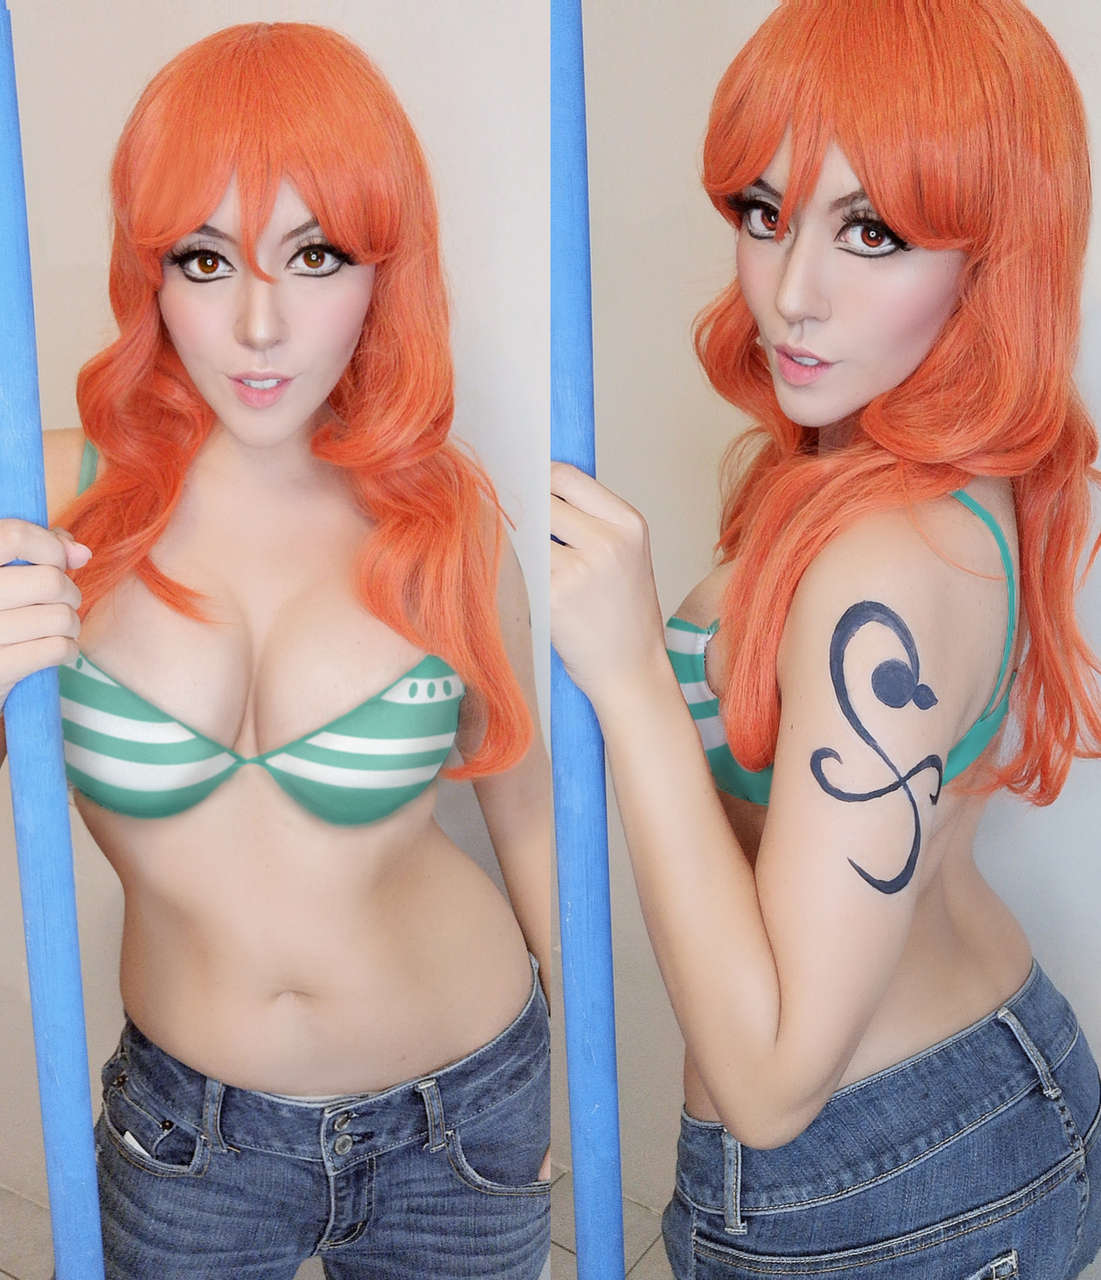 Nami From One Piece By Angel Kaor